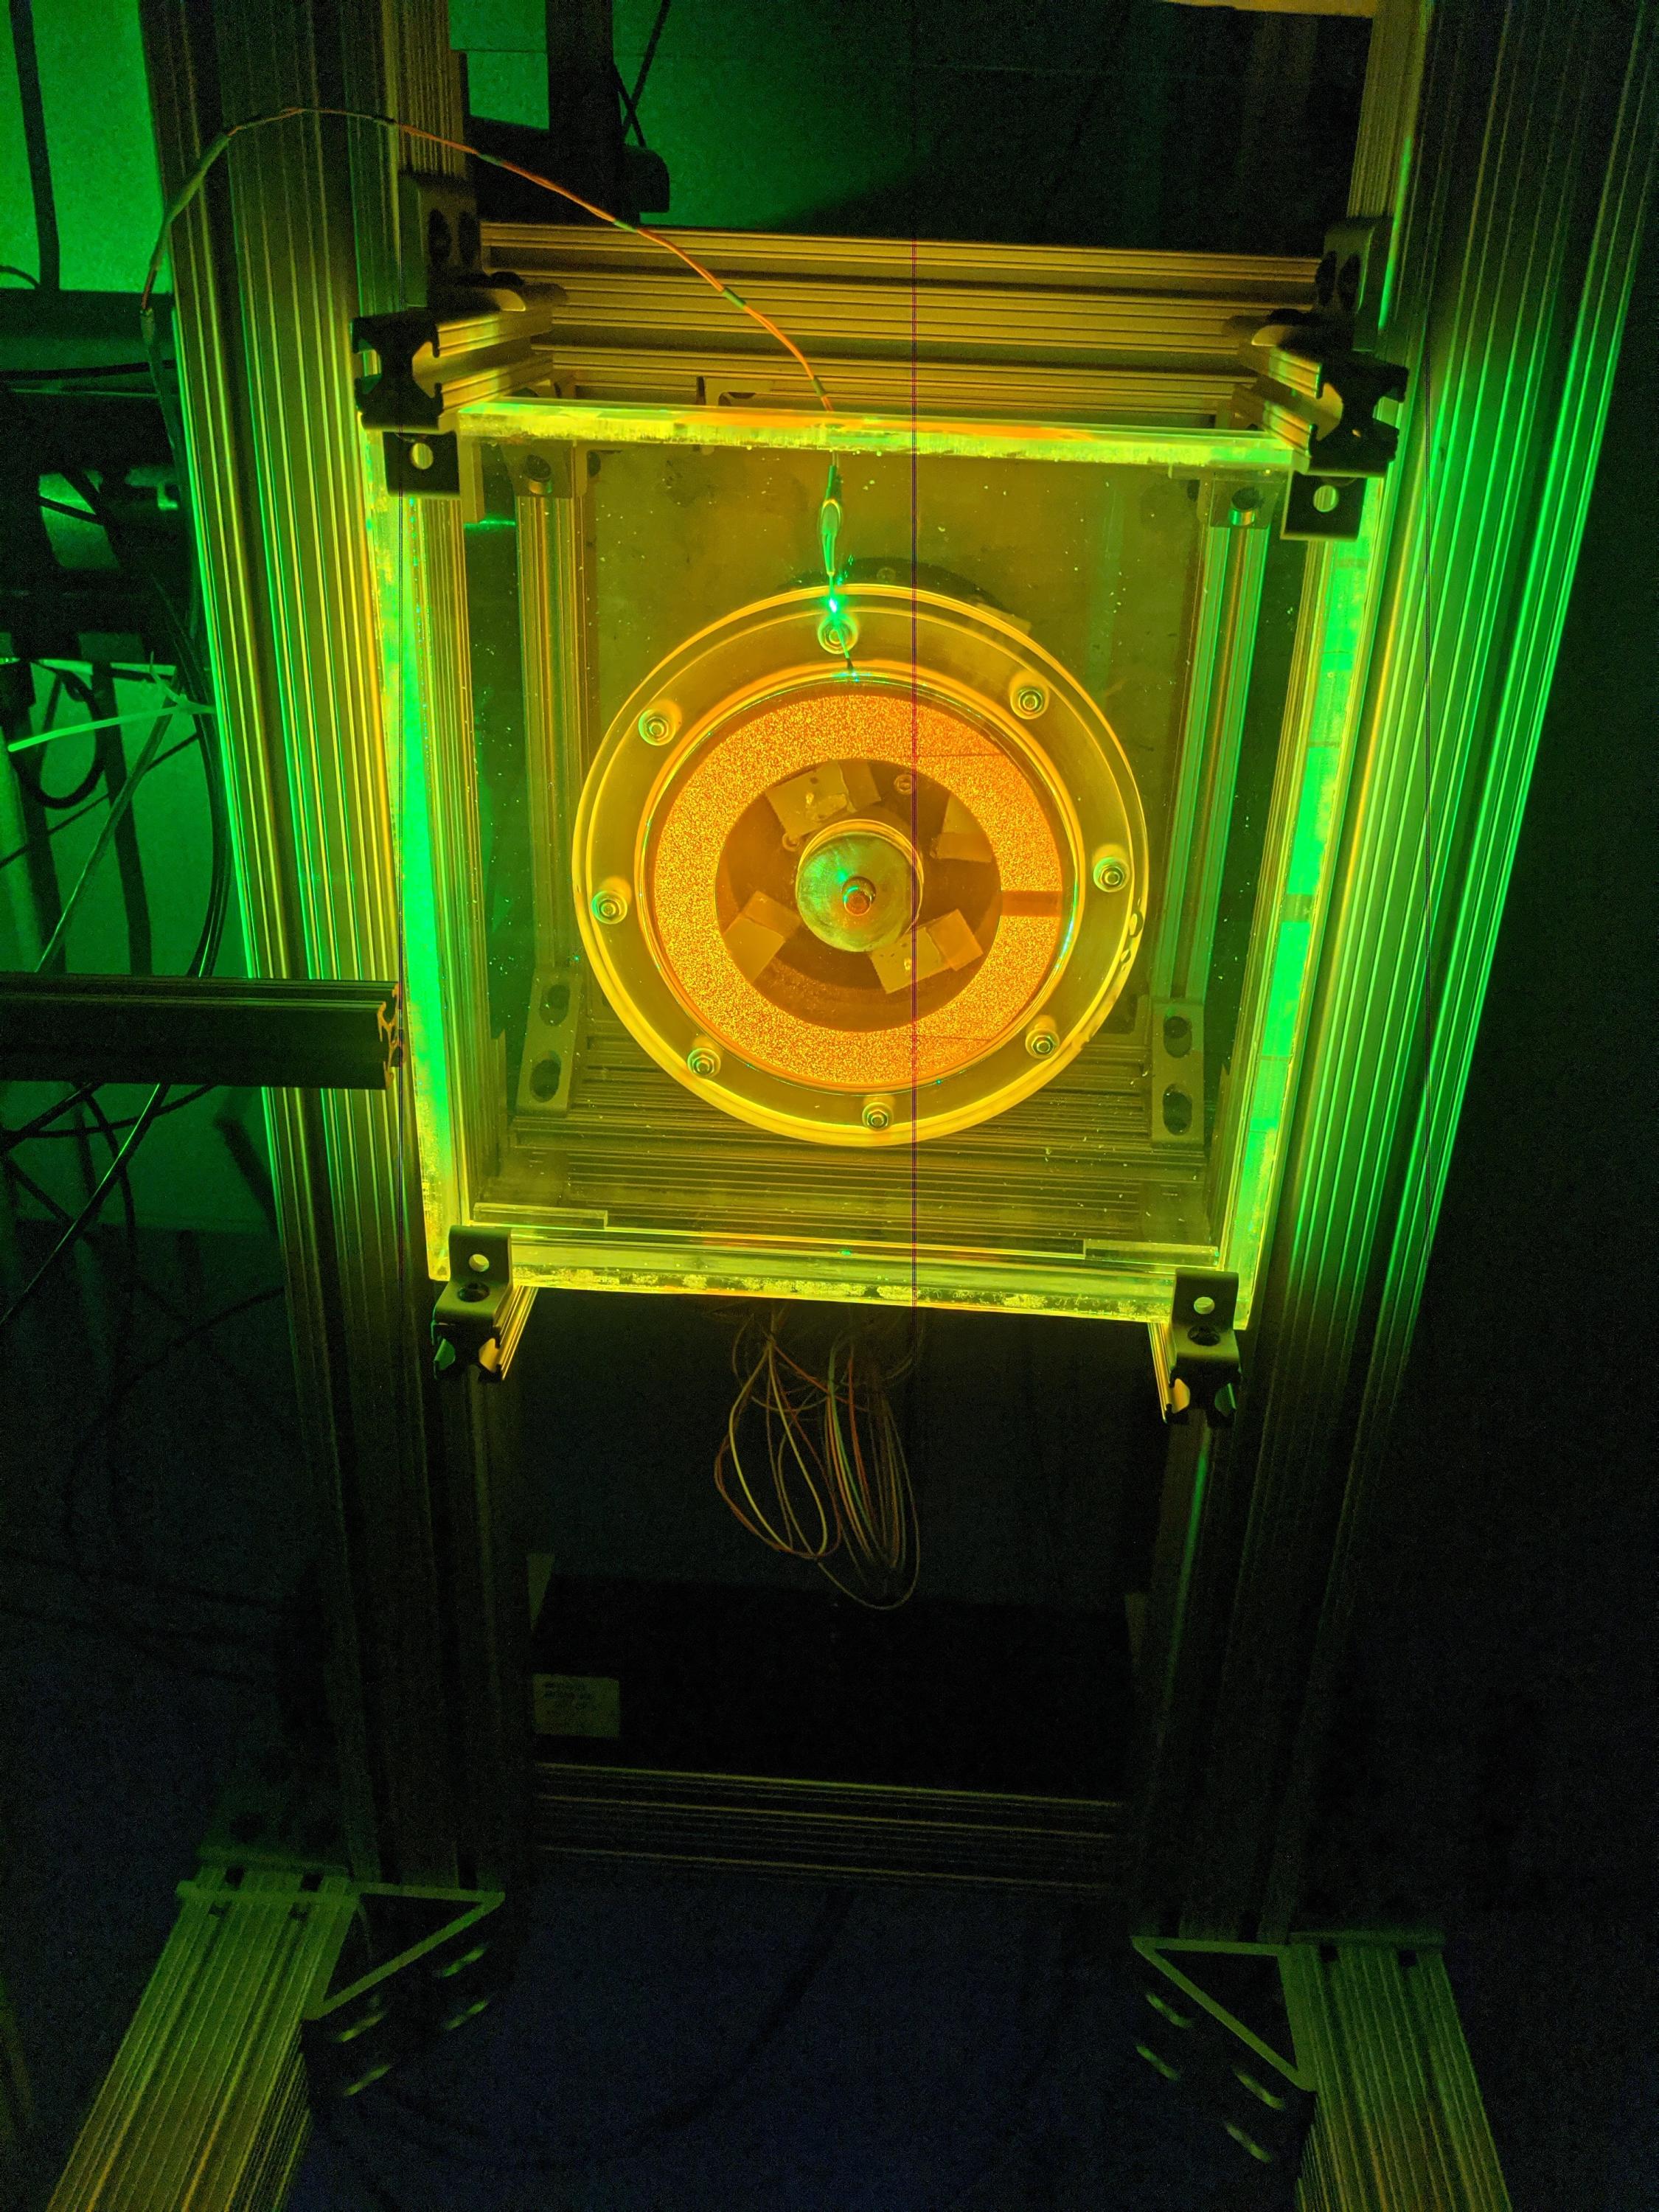 The setup allowed the researchers to reconstruct the flow by tracking the motion of millions of suspended fluorescent particles. (Photo: Michael Schatz)